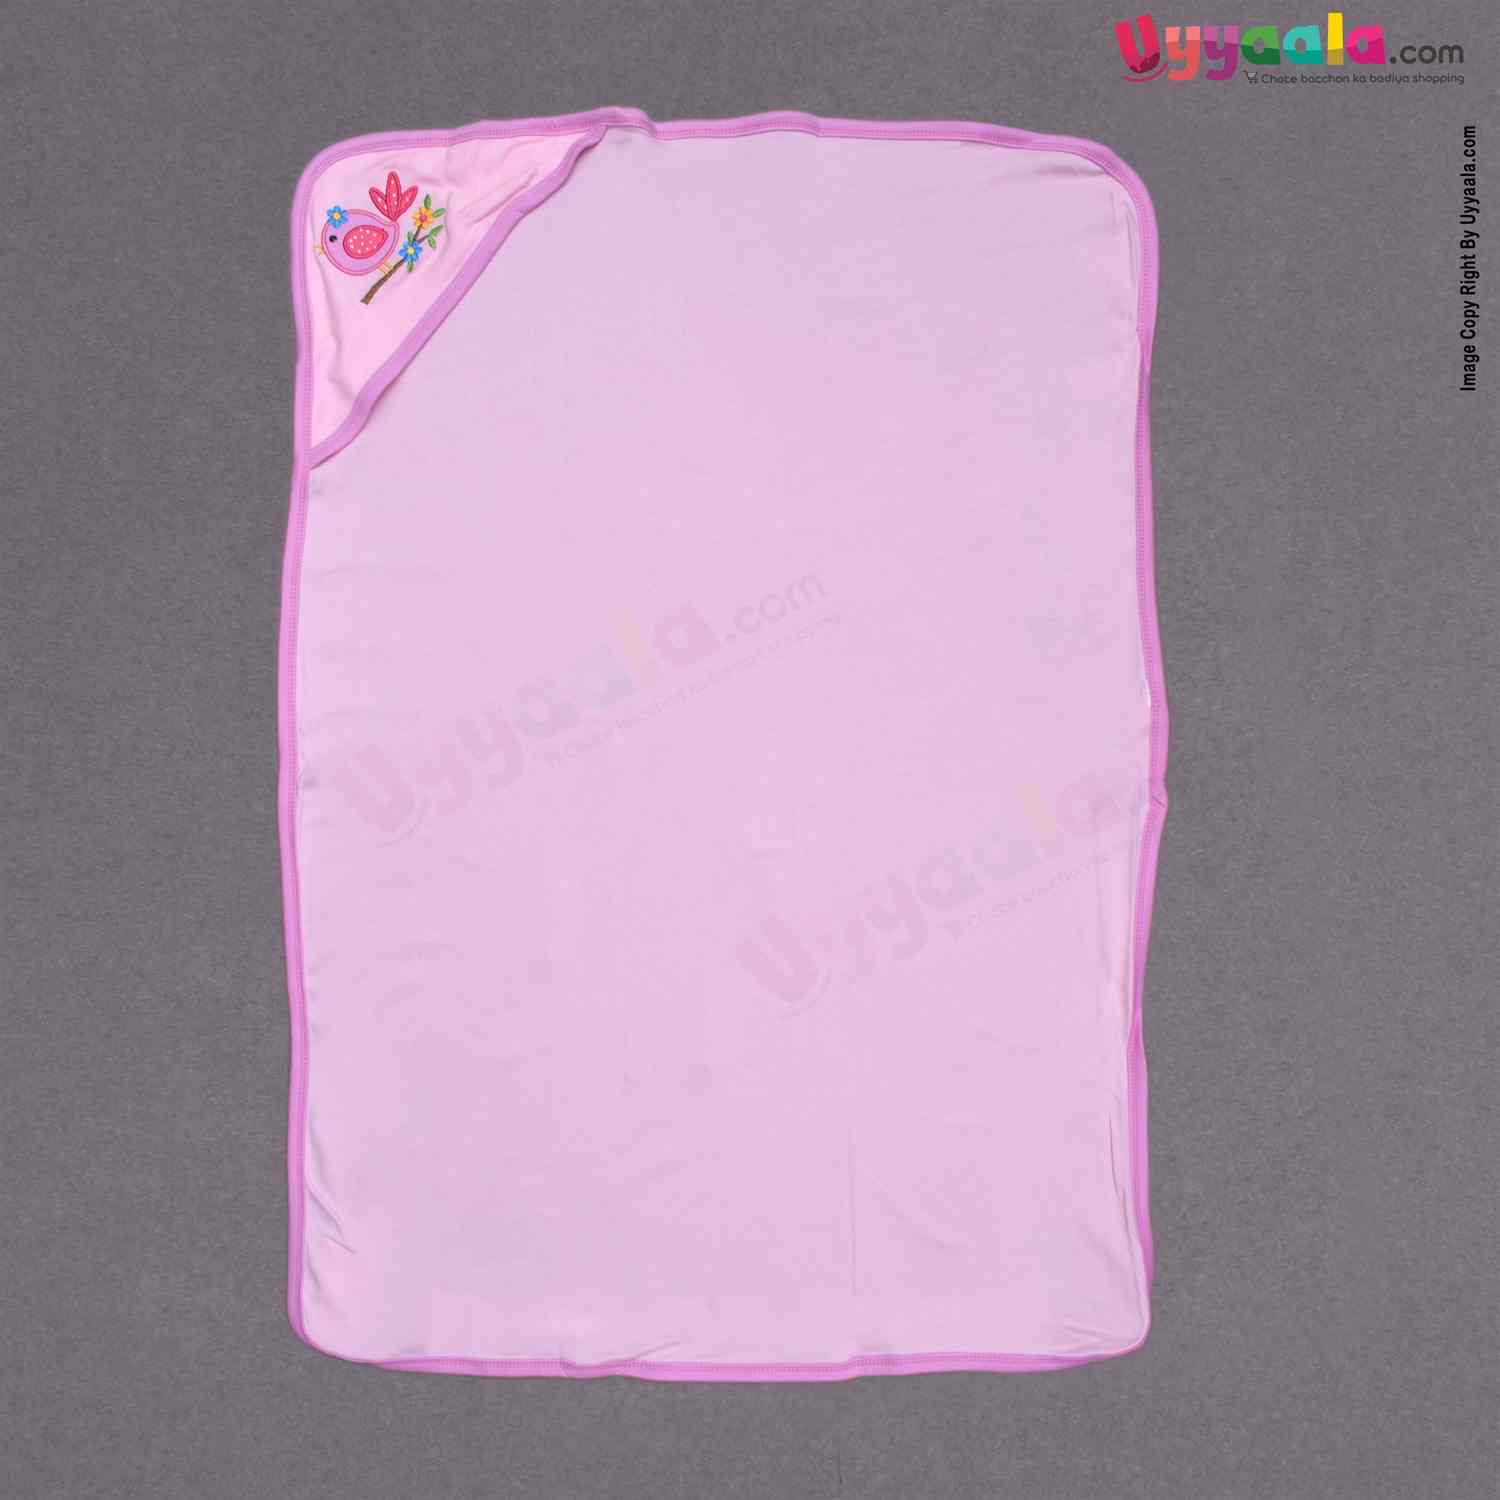 BABY STATION Hooded Single Layer Towel